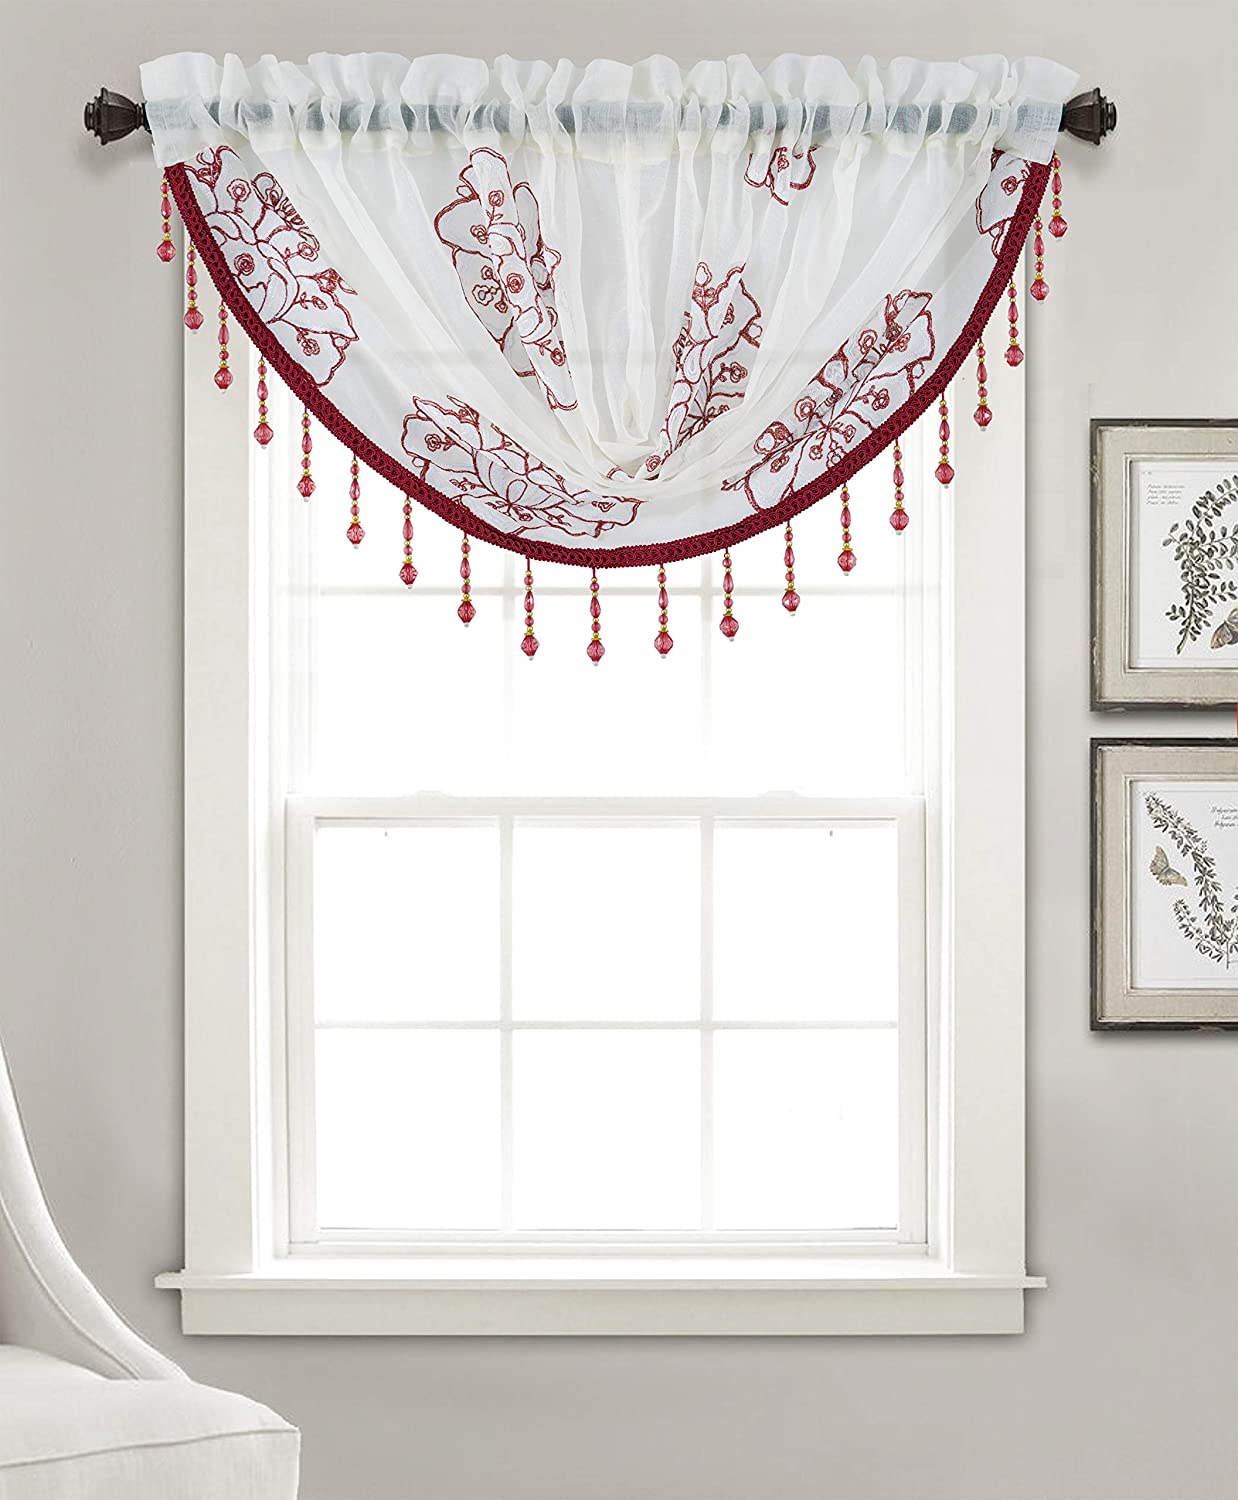 Bergen Floral Embroidered 47 x 37 in. Swag Valance by Olivia Gray - Linen Universe Co.